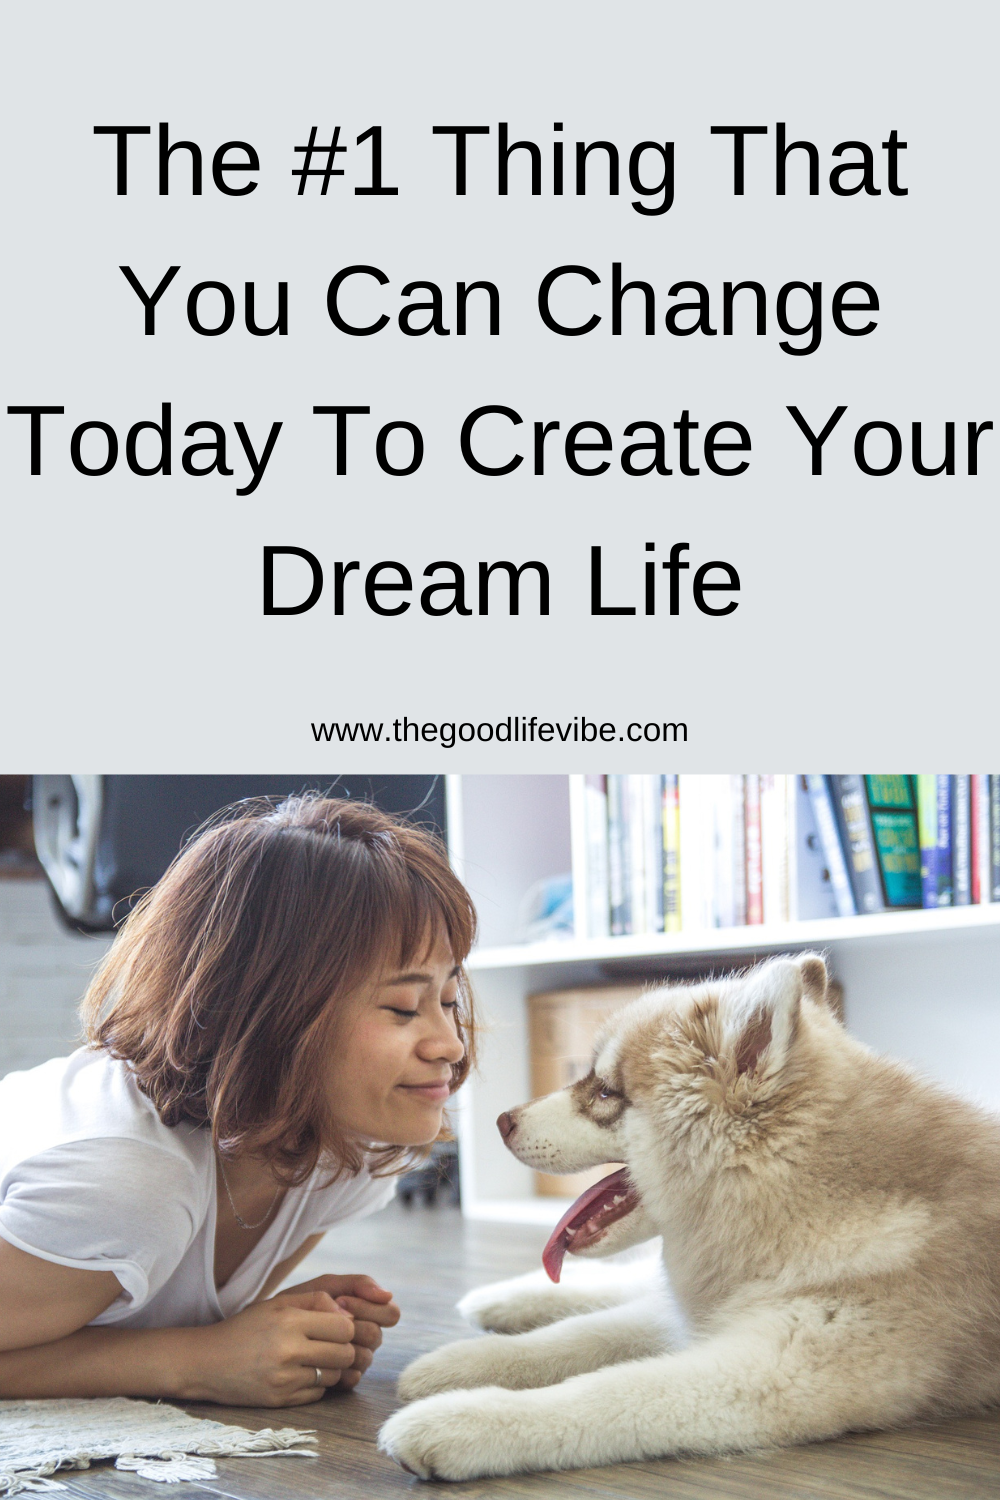 The #1 Thing That You Can Change Today To Create Your Dream Life